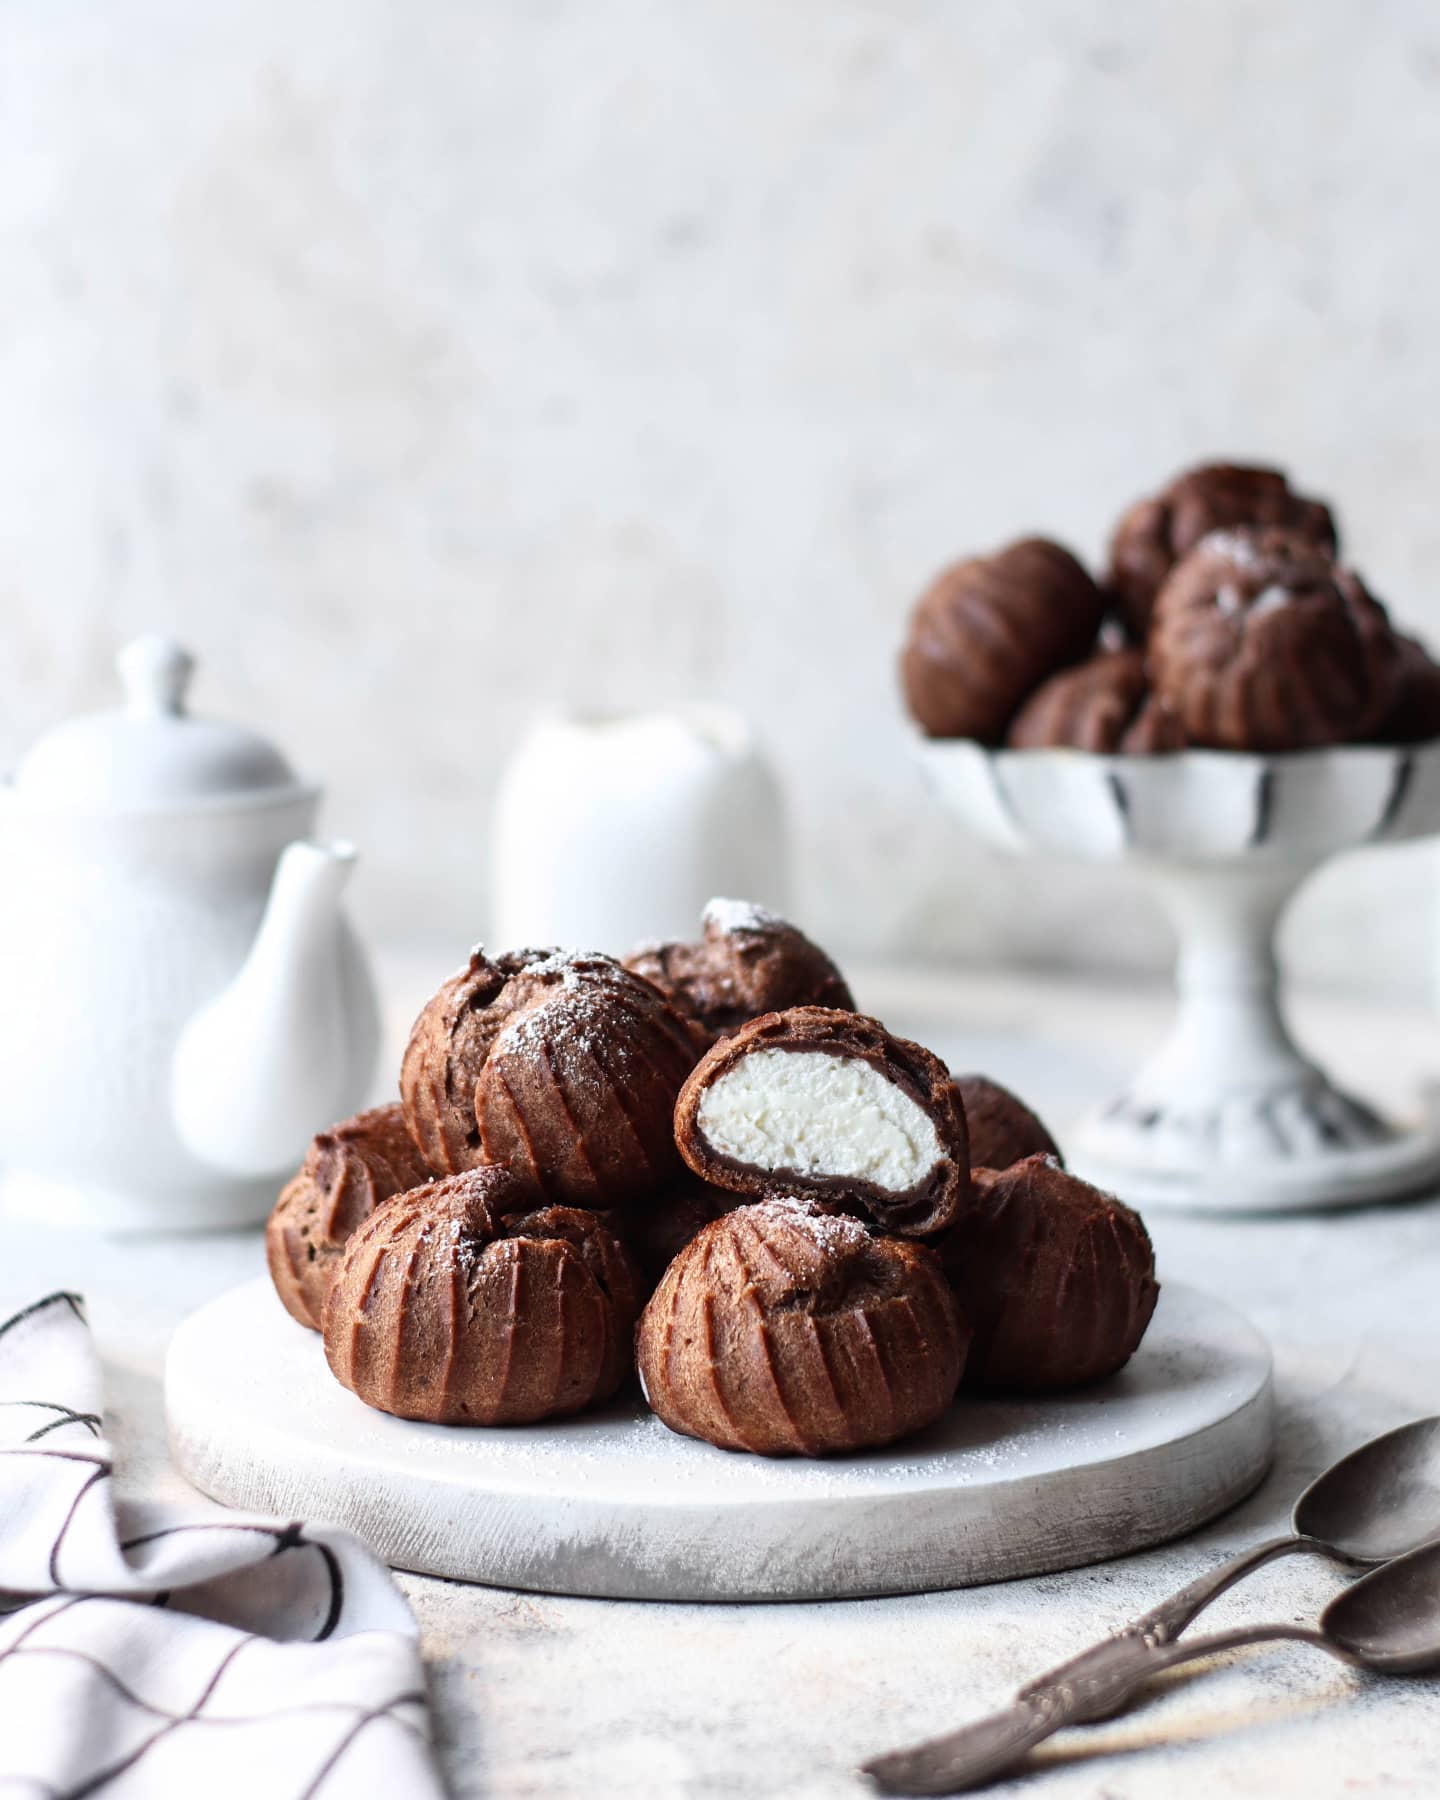 Chocolate profiteroles with whipped cream